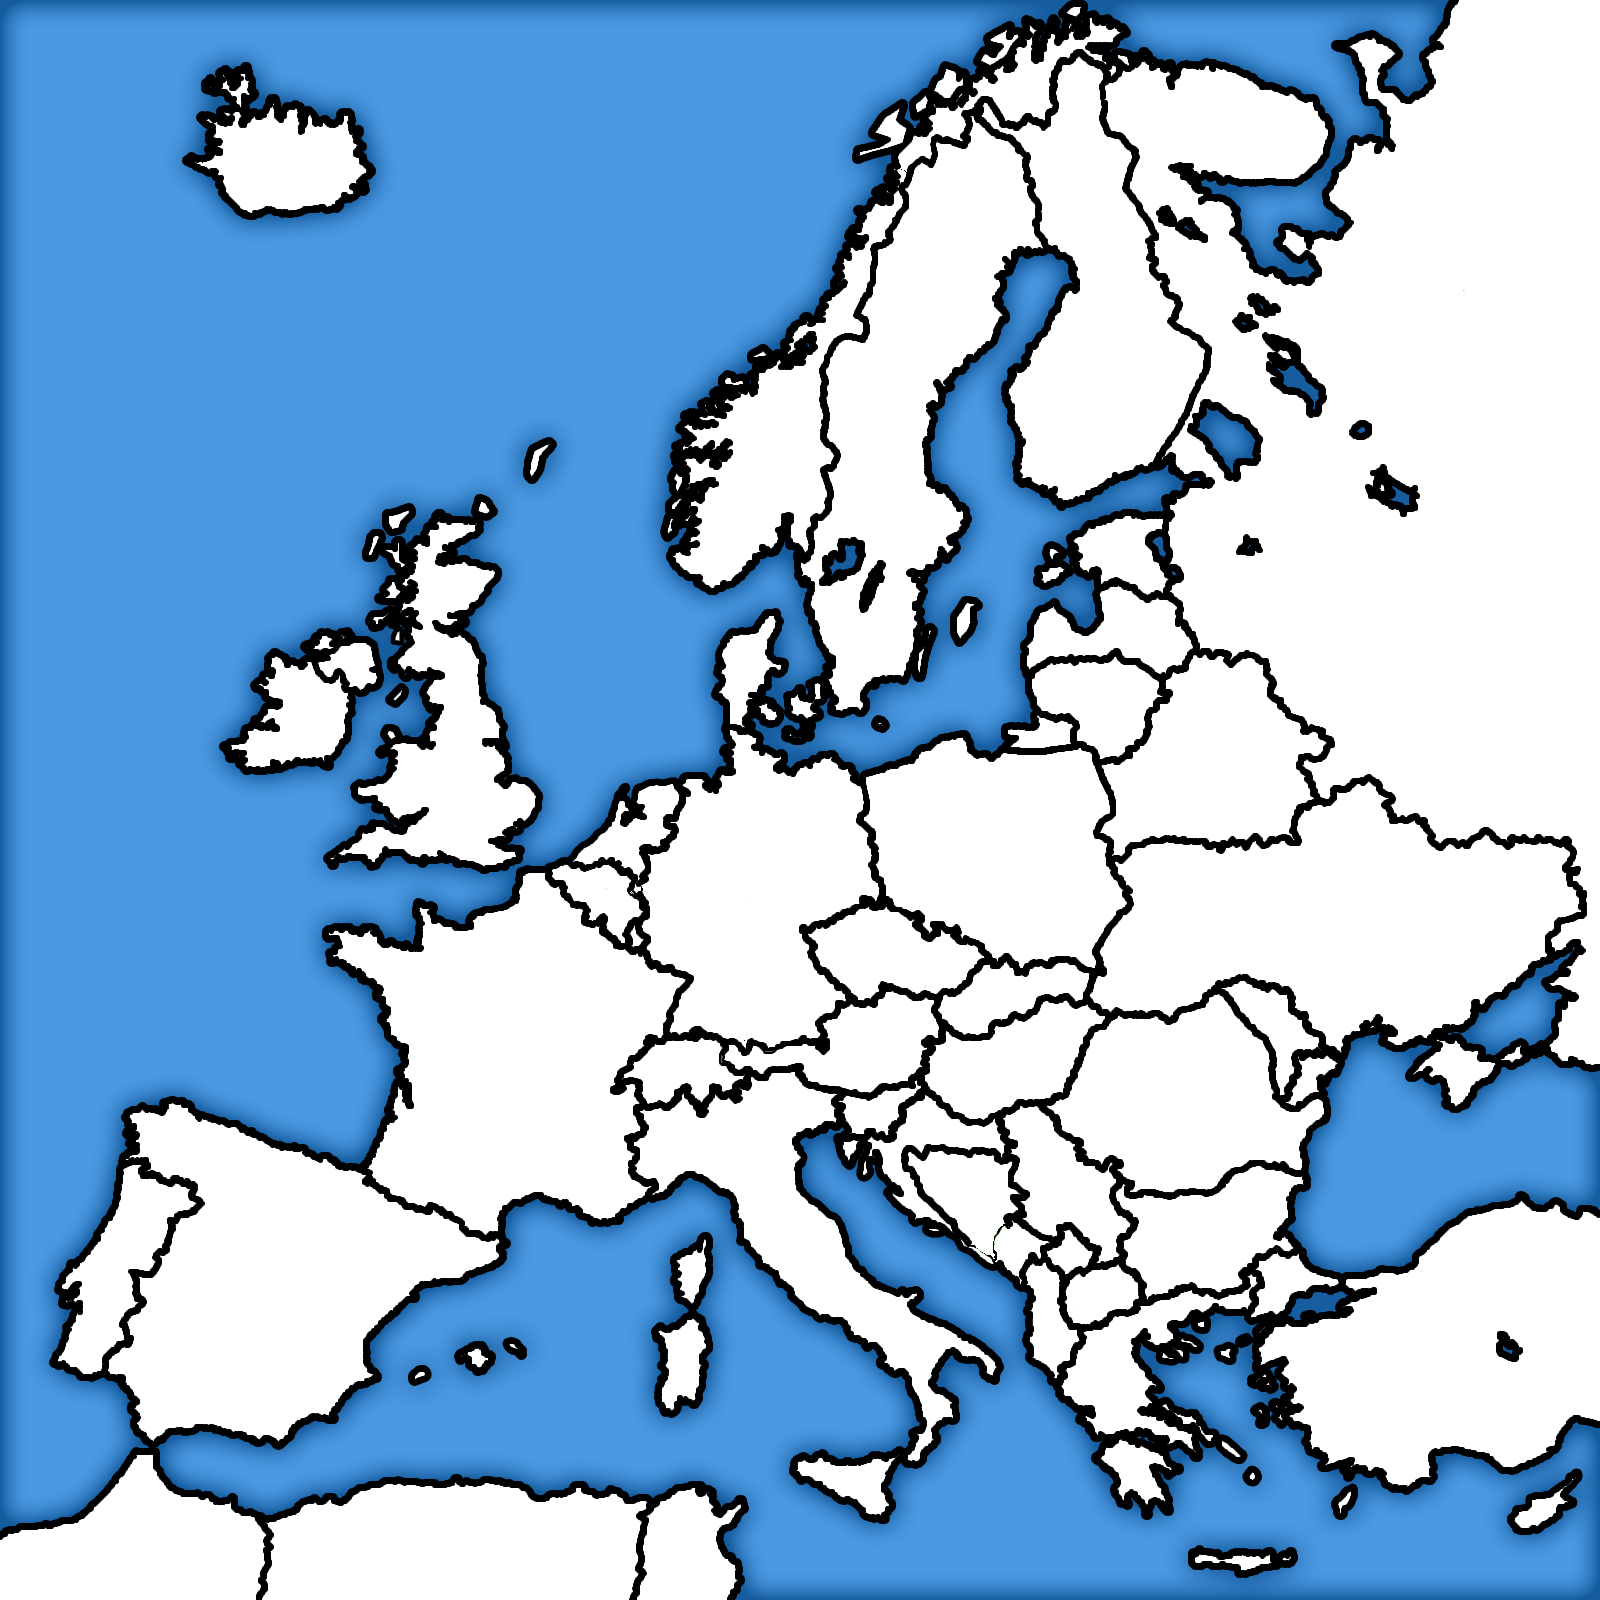 Europe Map OpenGameArt org